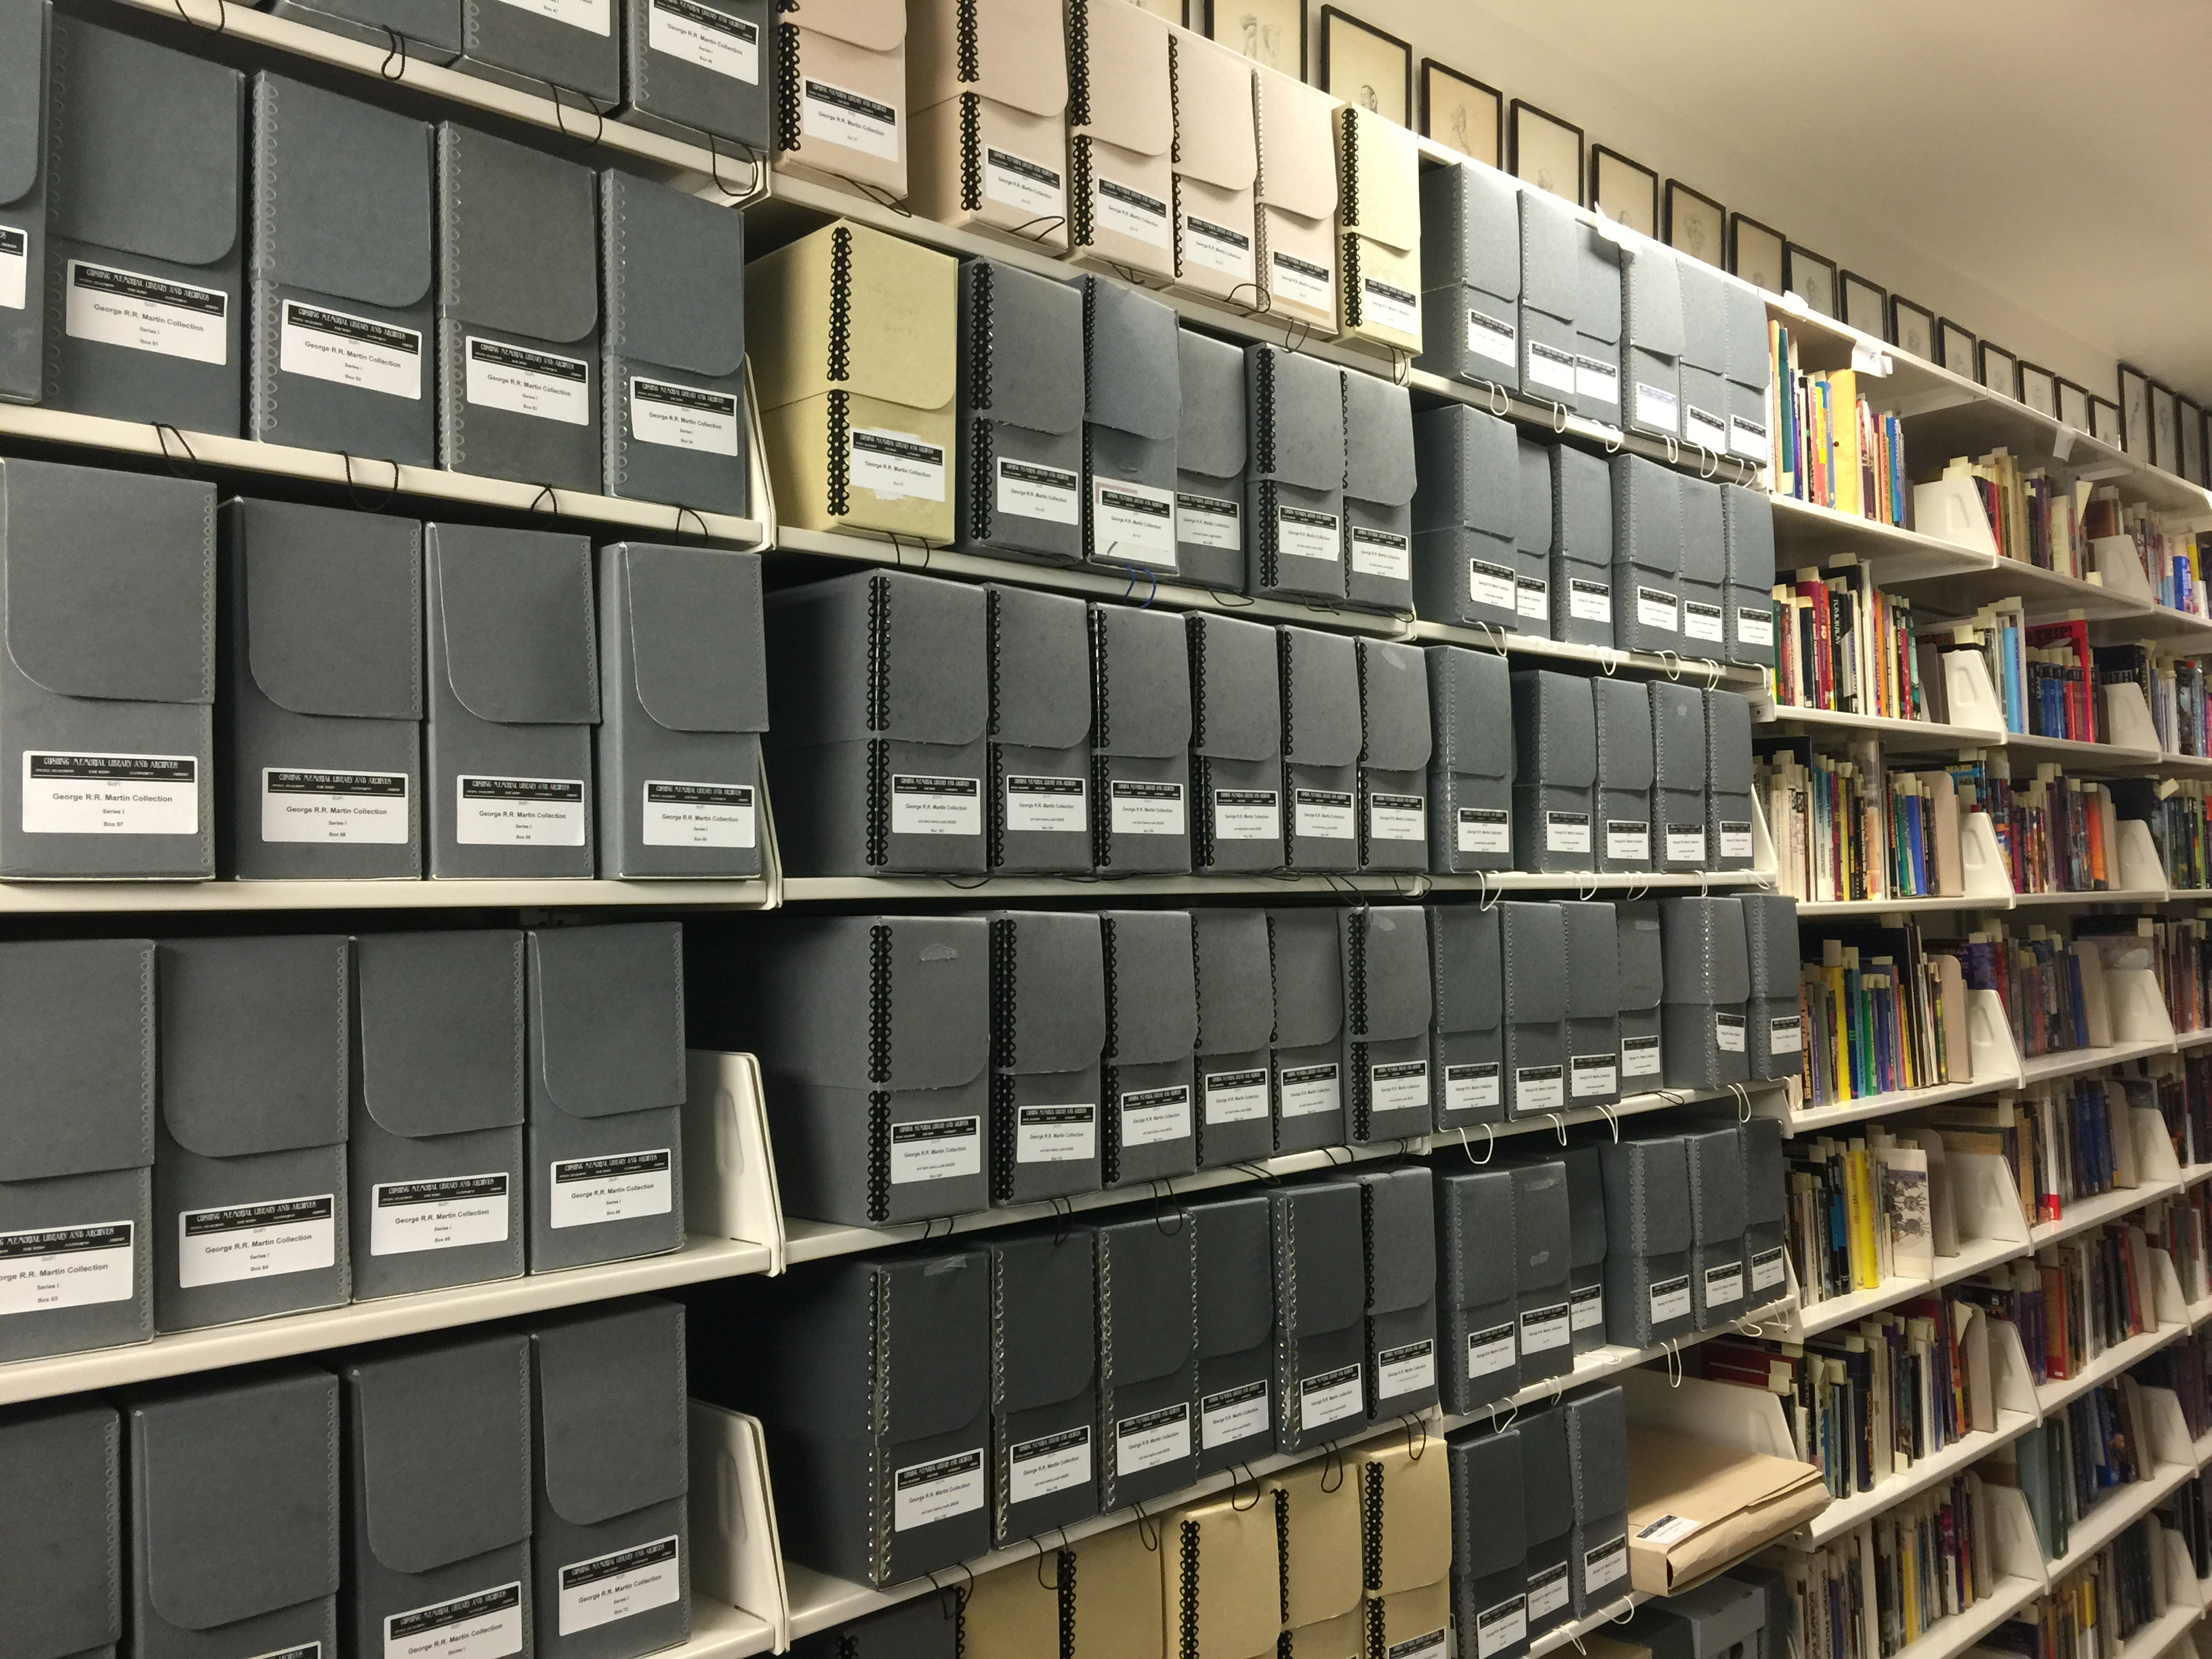 An image of the George R.R. Martin Papers in Texas A&M's Cushing Library